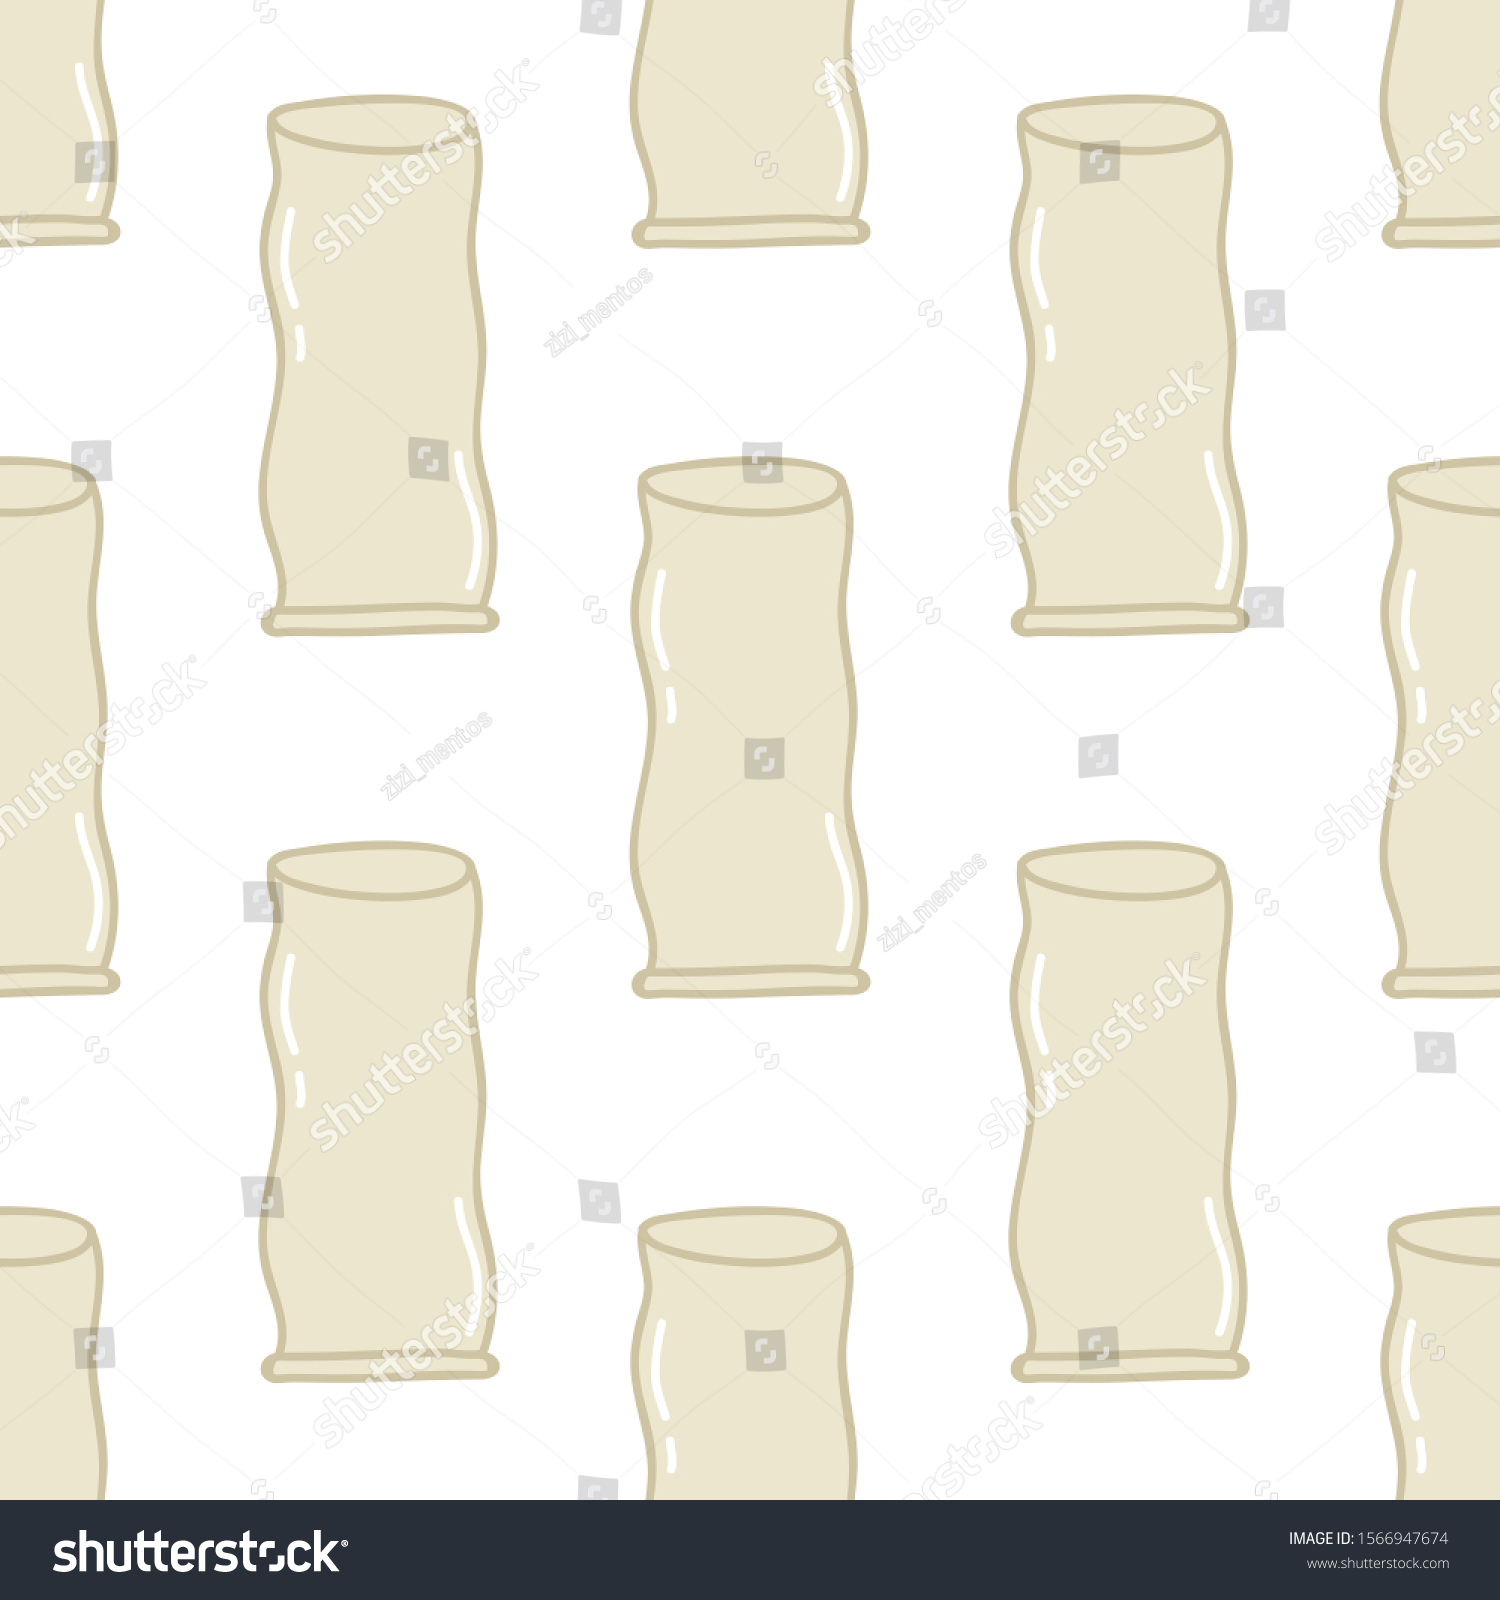 Female Condom Seamless Doodle Pattern Vector Stock Vector (Royalty Free ...